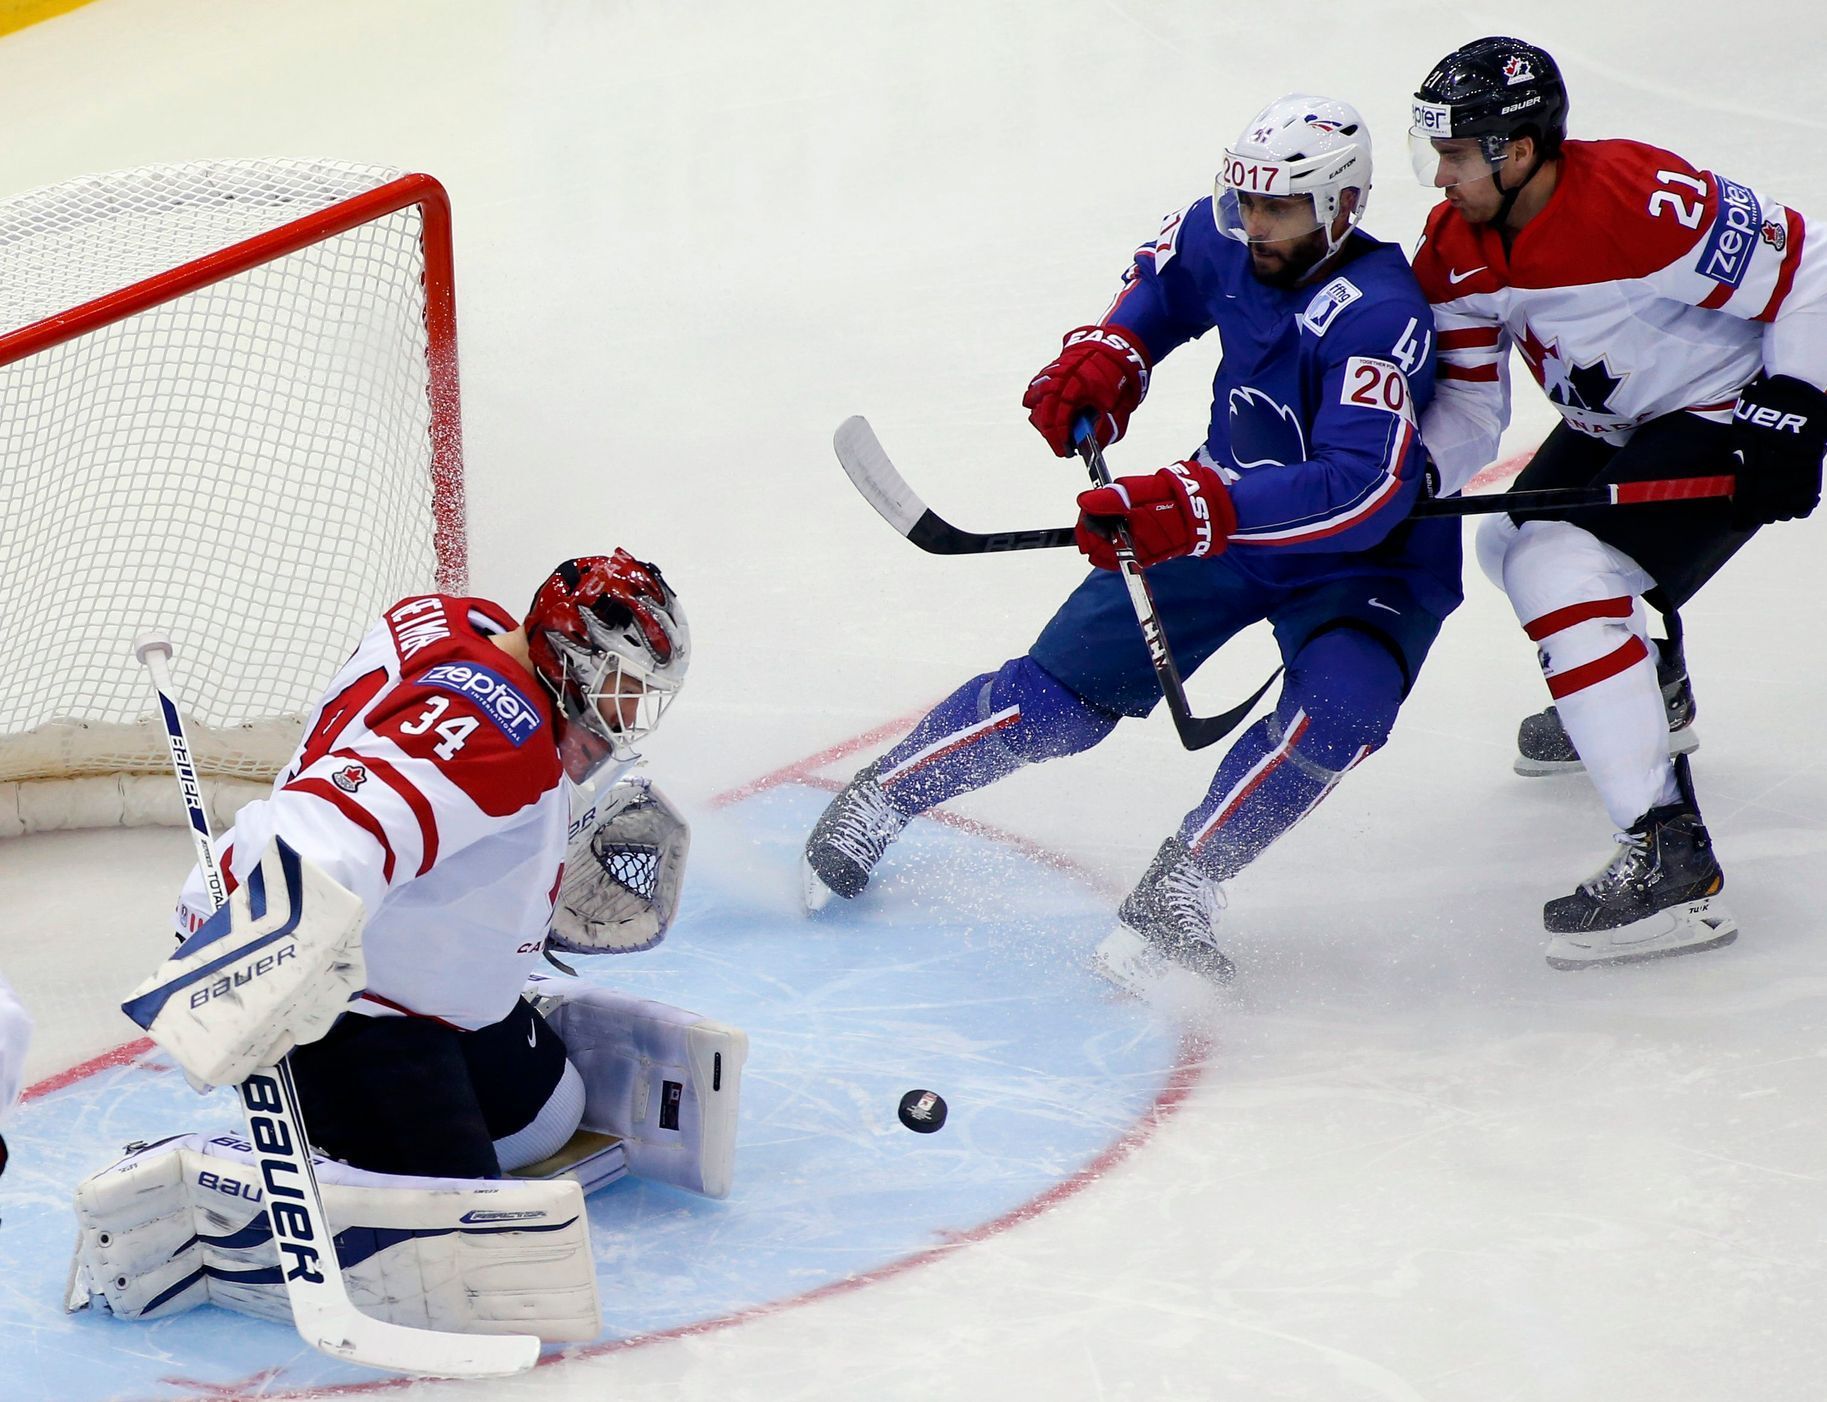 Goalkeeper Reimer and Read of Canada save in front of Bellemare of France during the first period of their men's ice hockey World Championship Group A game at Chizhovka Arena in Minsk